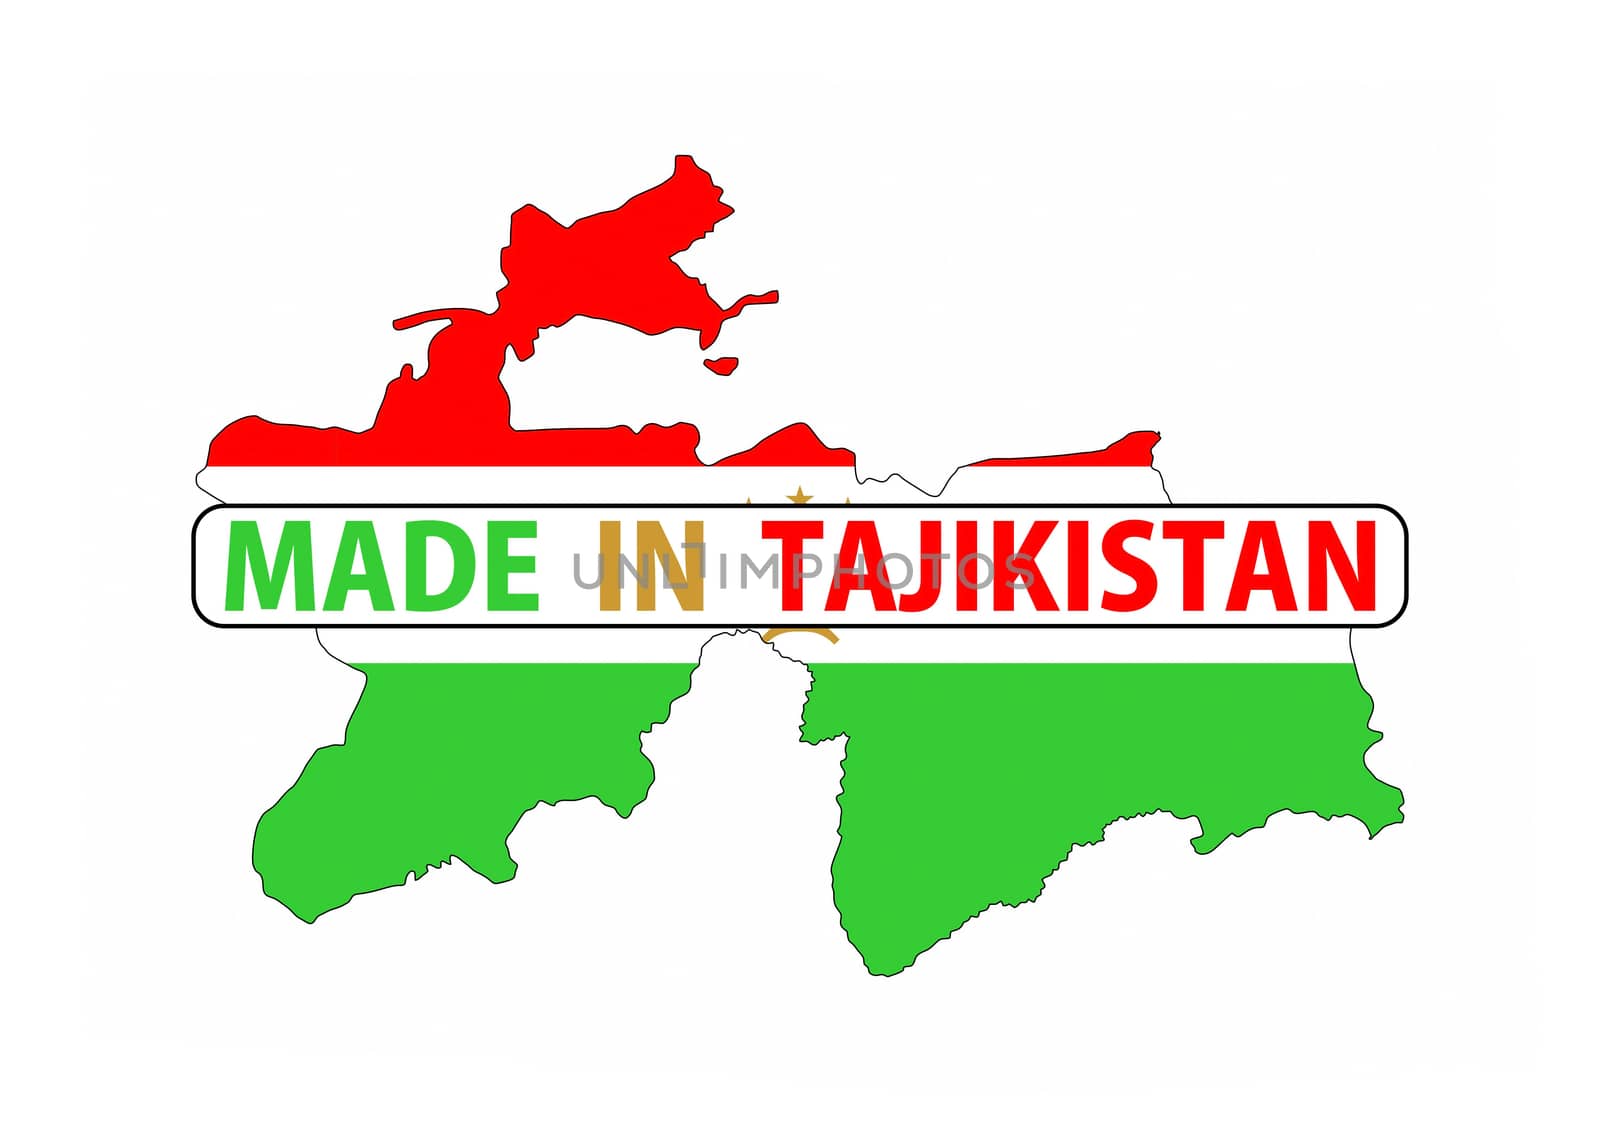 made in tajikistan country national flag map shape with text